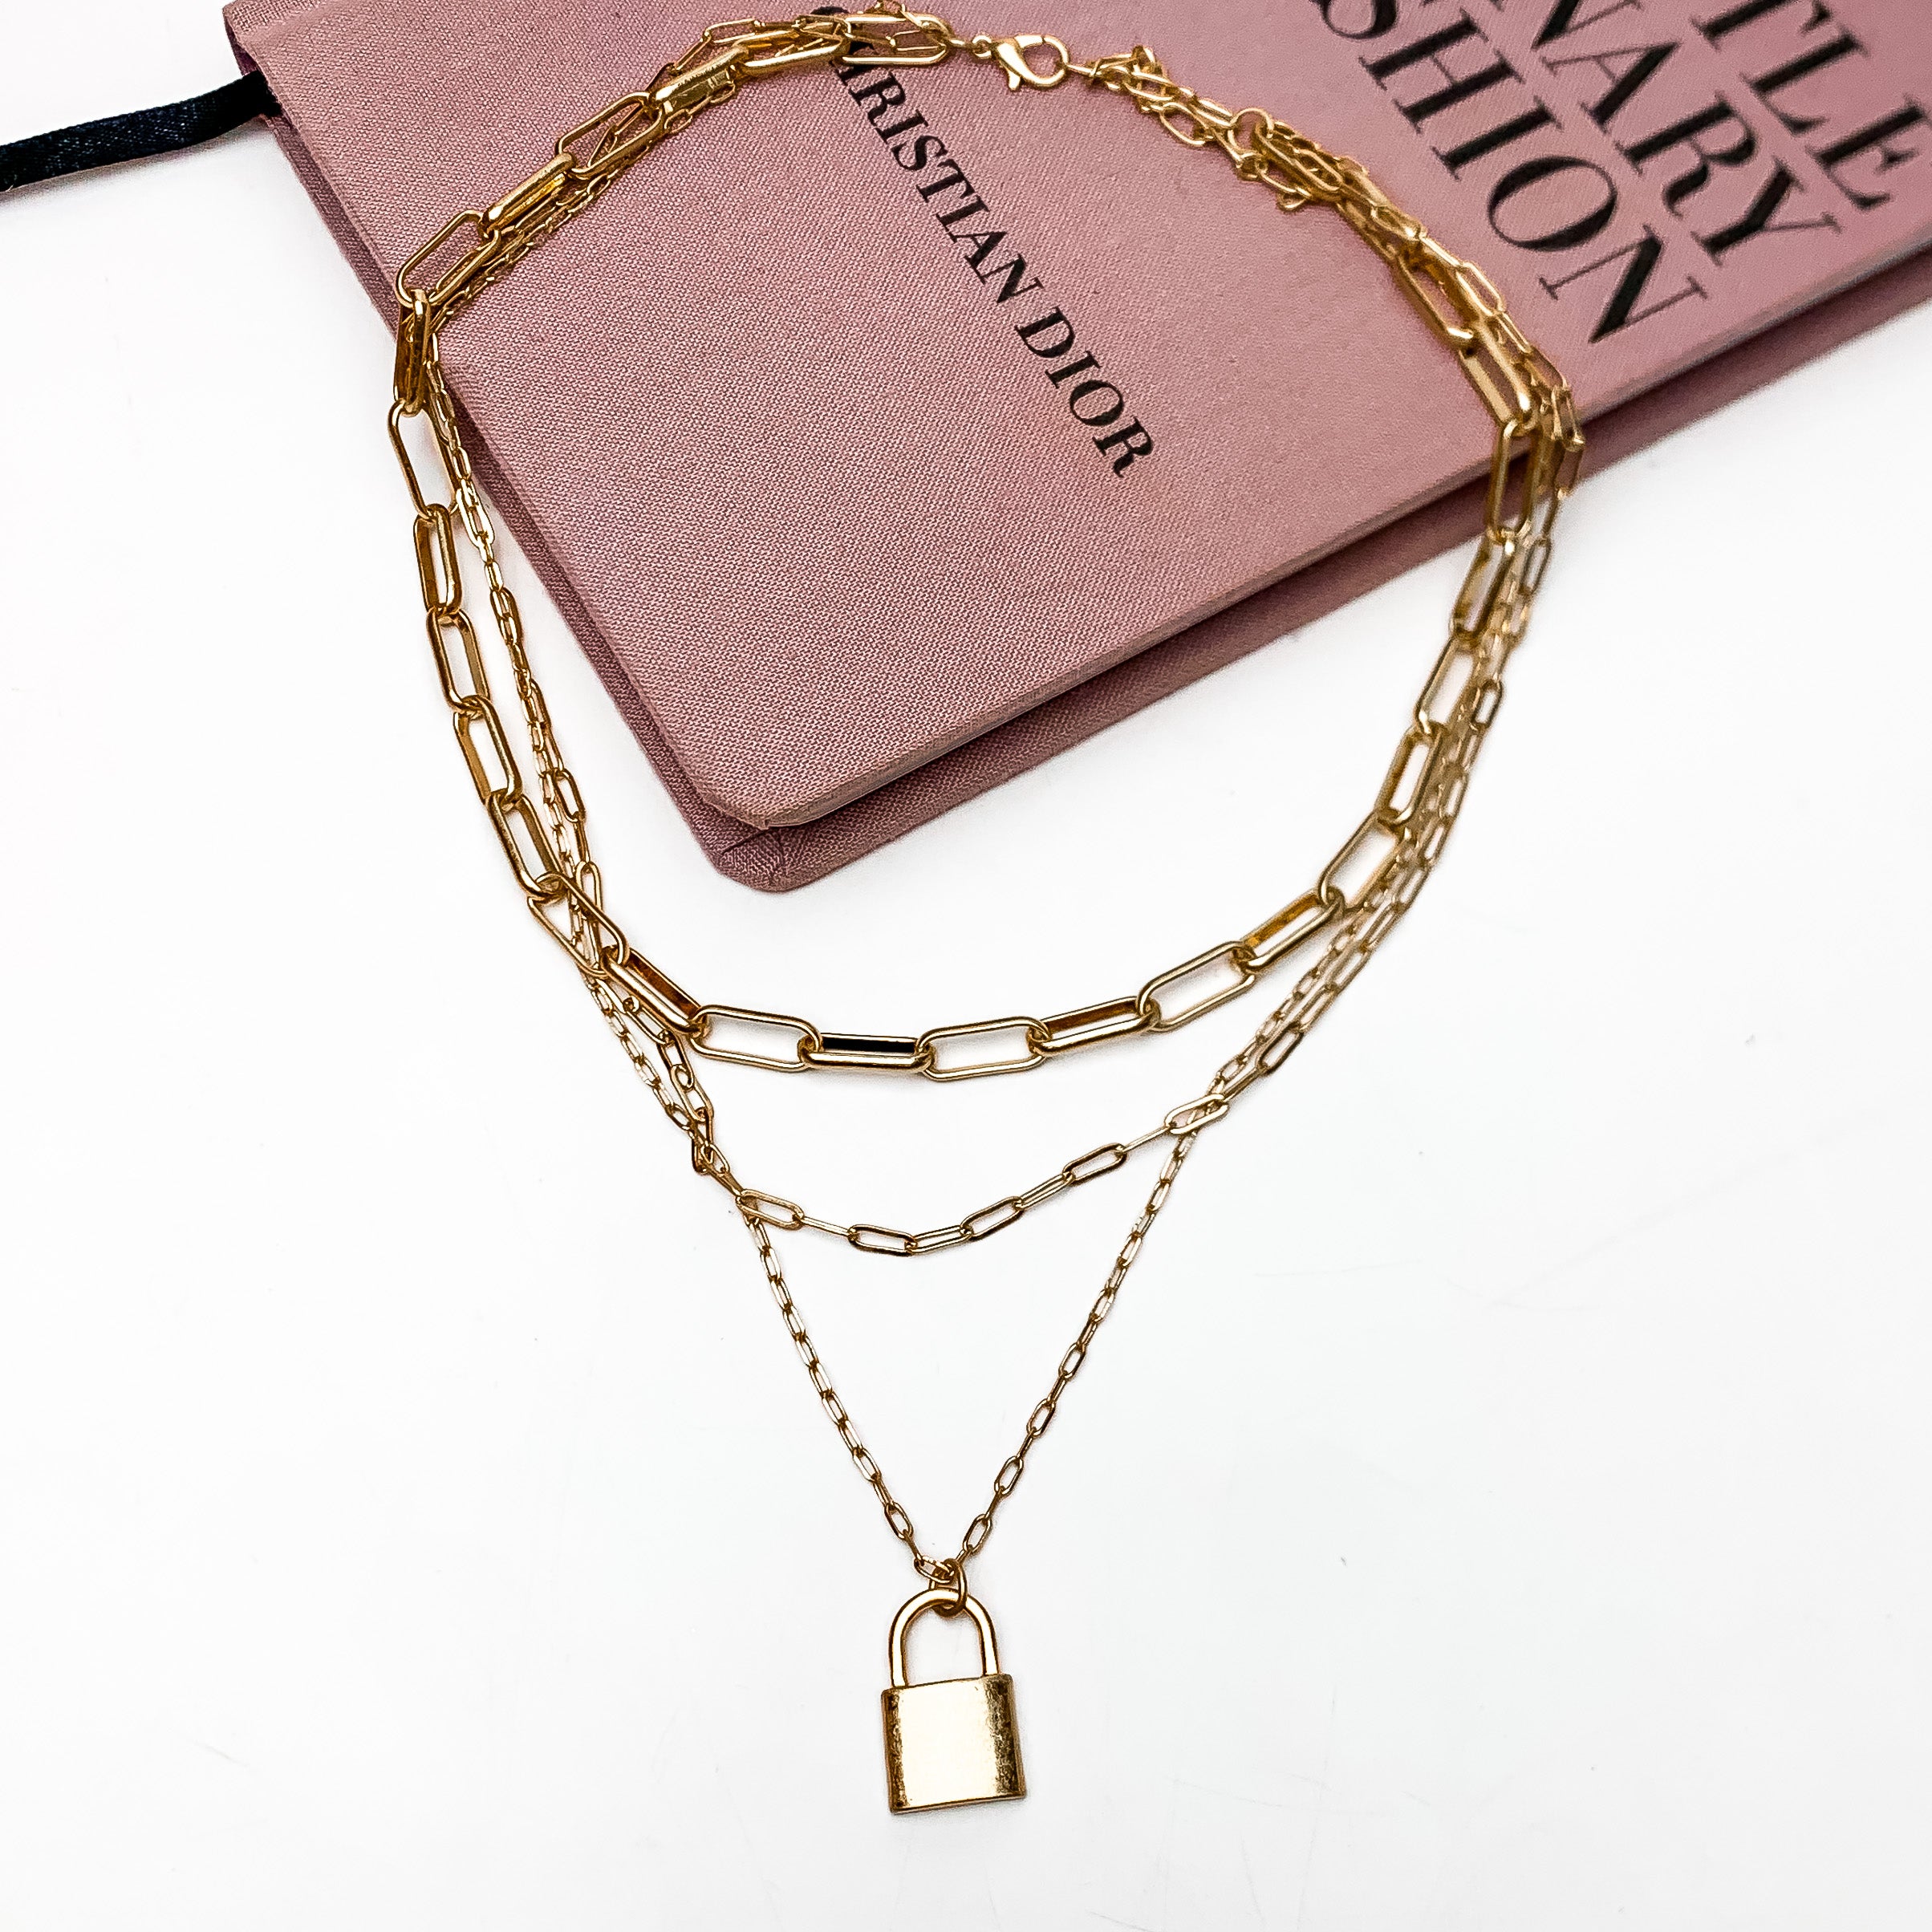 Locked Heart Gold Tone Triple Stand Chain Necklace. This necklace is pictured laying on a pink book with a white background.